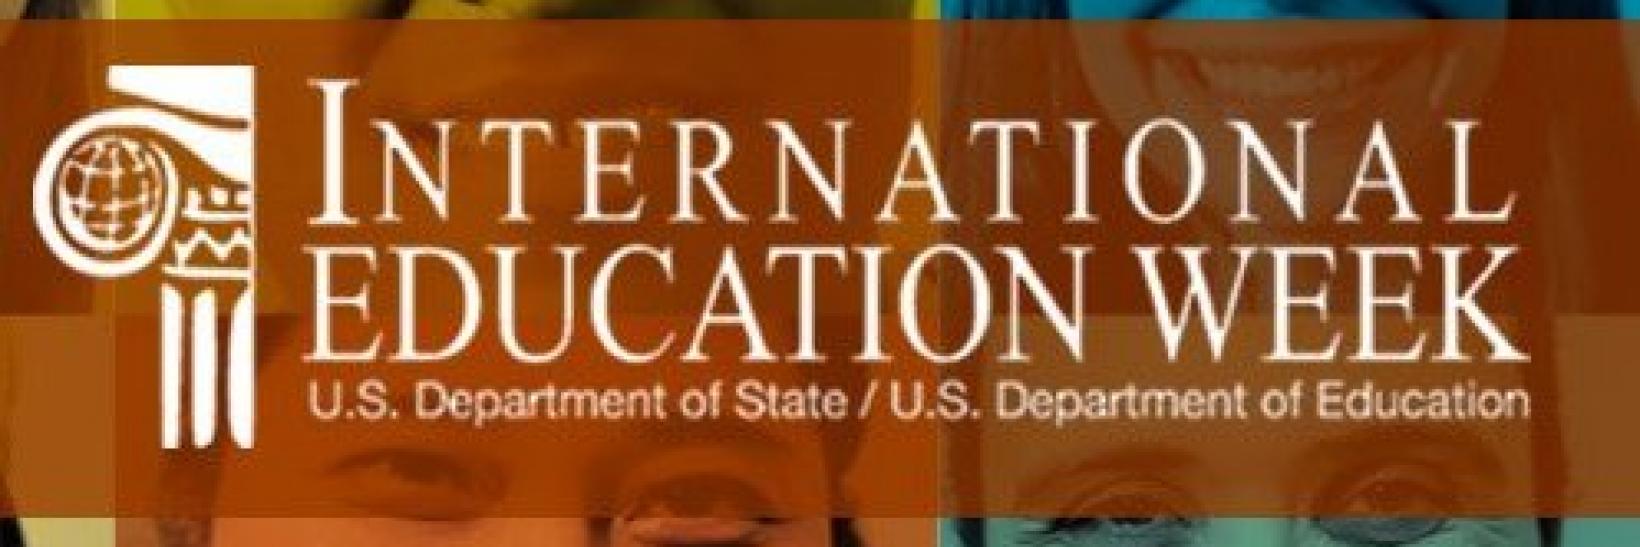 International Education Banner (with smiling, diverse faces in background)